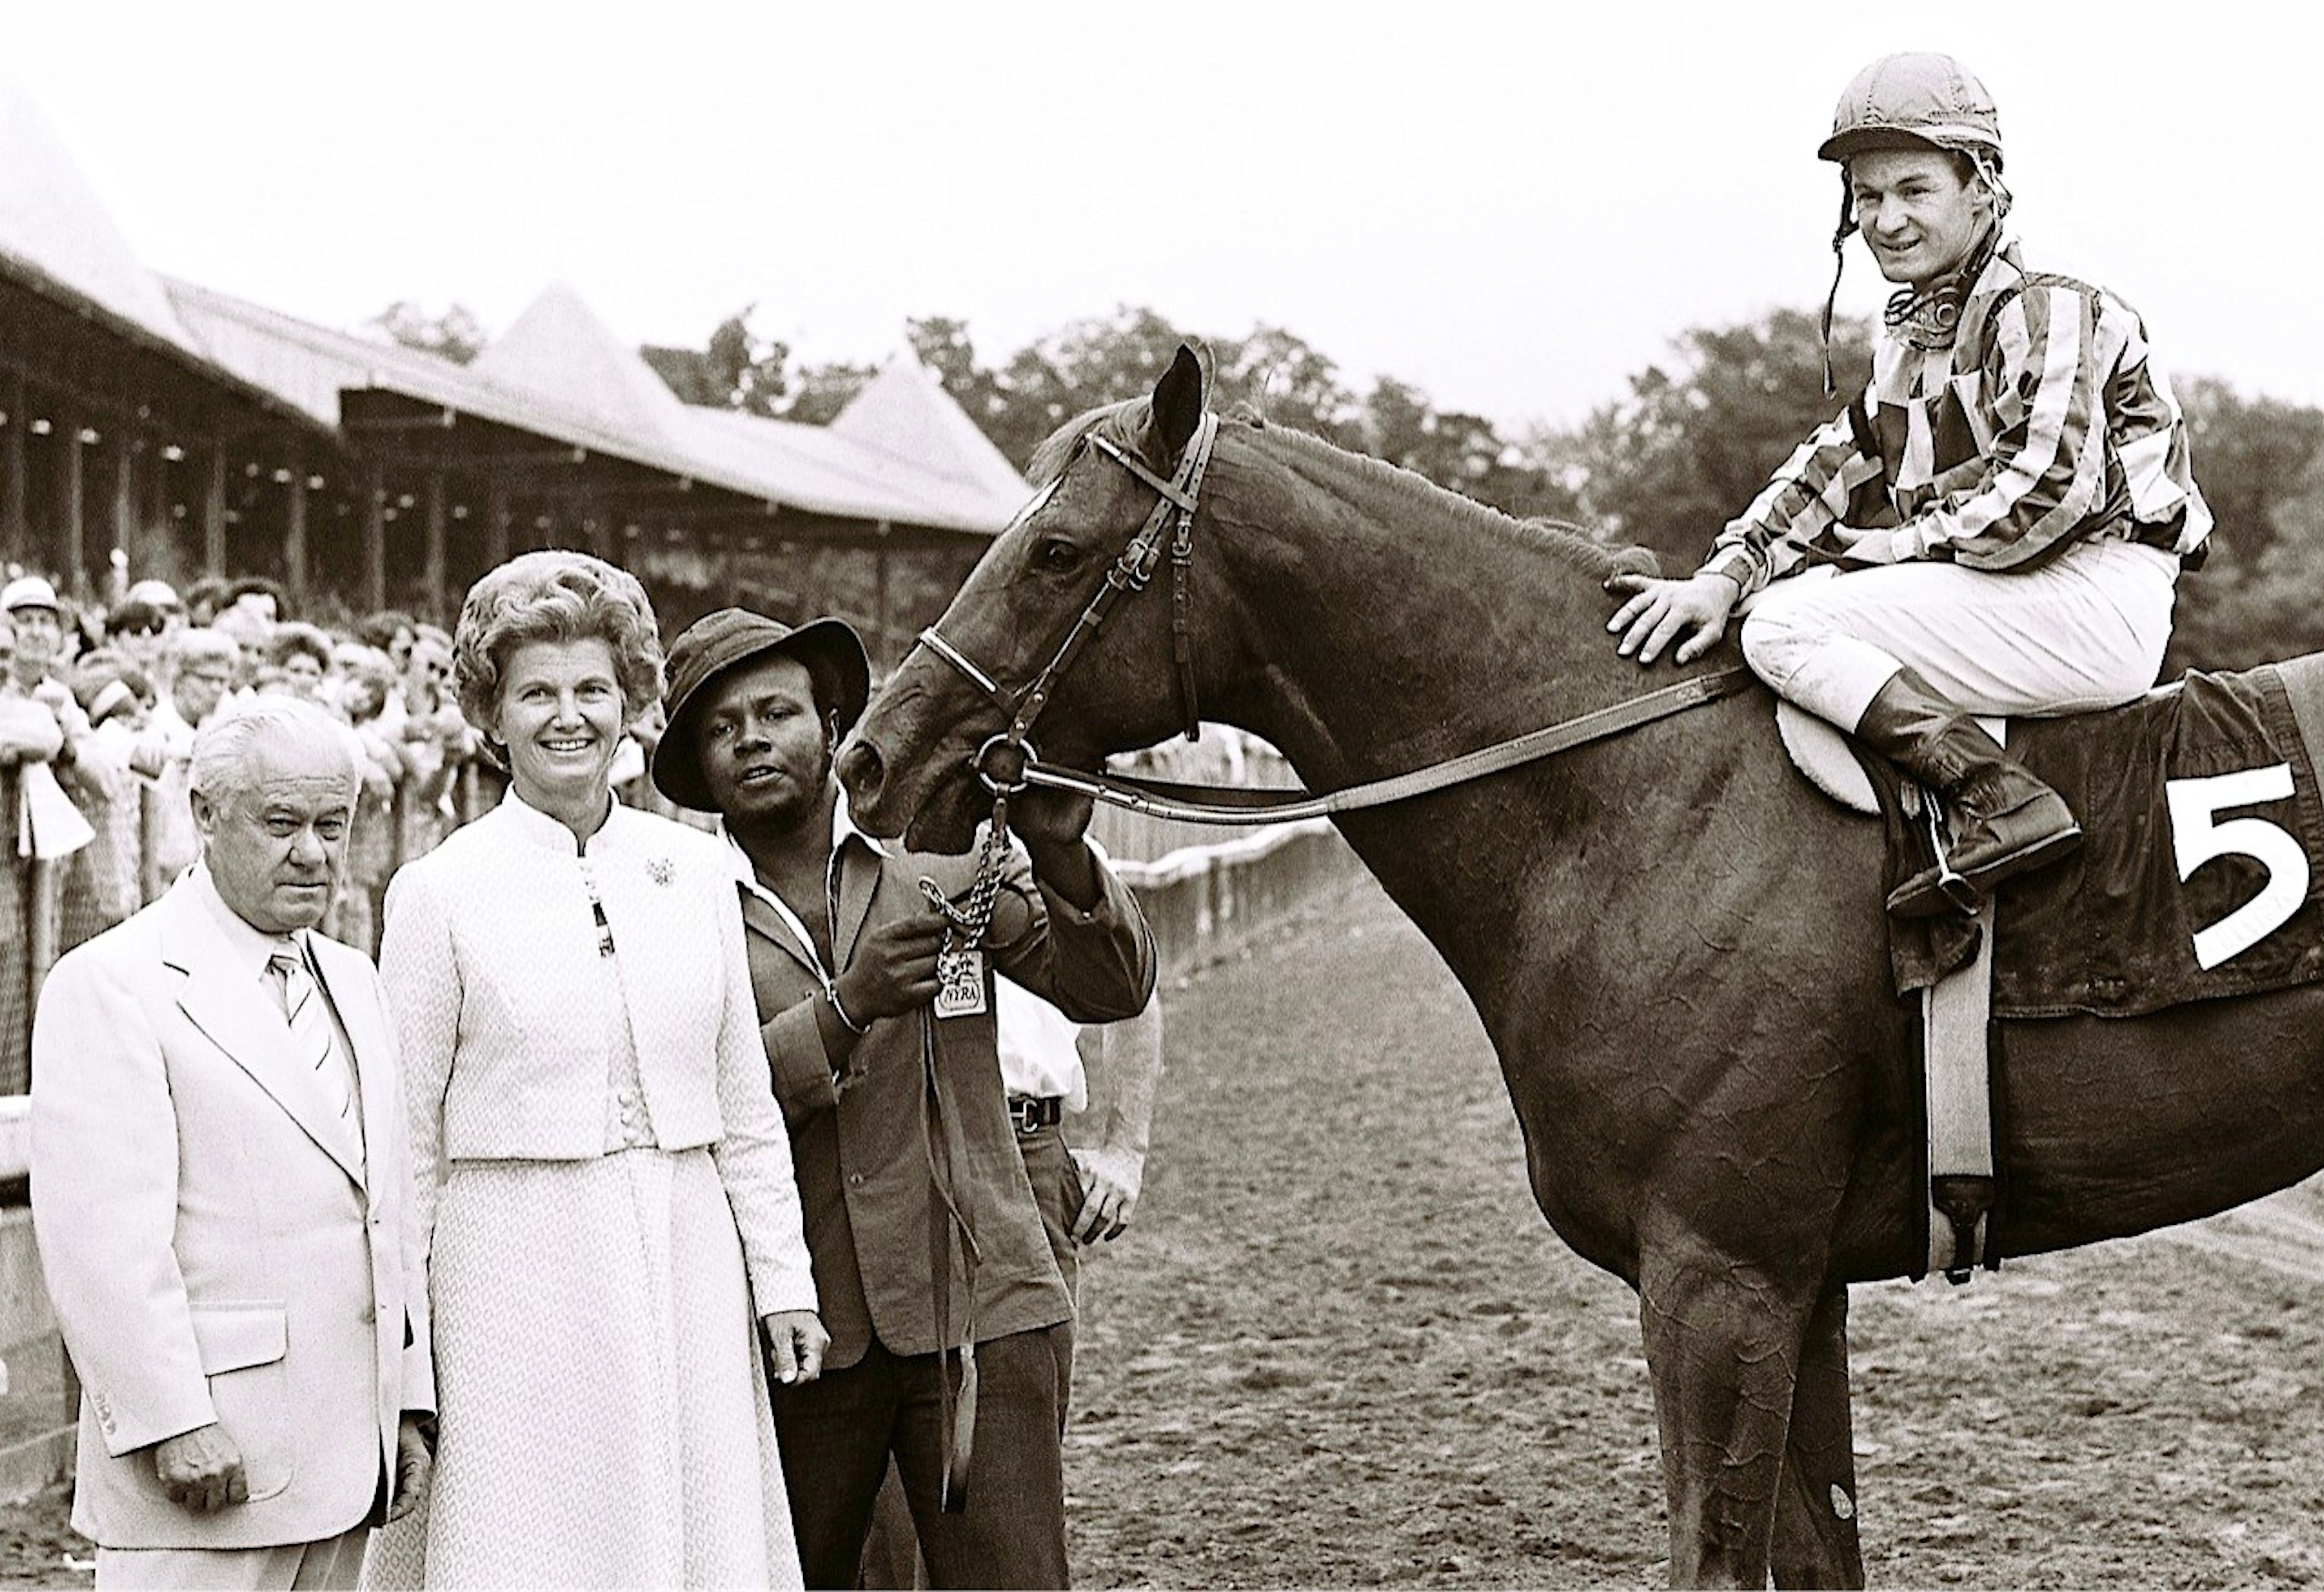 From left, Lucien Laurin, Penny Chenery, Eddie Sweat, and Secretariat, Ron Turcotte up, after Secretariat's victory in the 1972 Sanford Stakes at Saratoga (Douglas Lees)